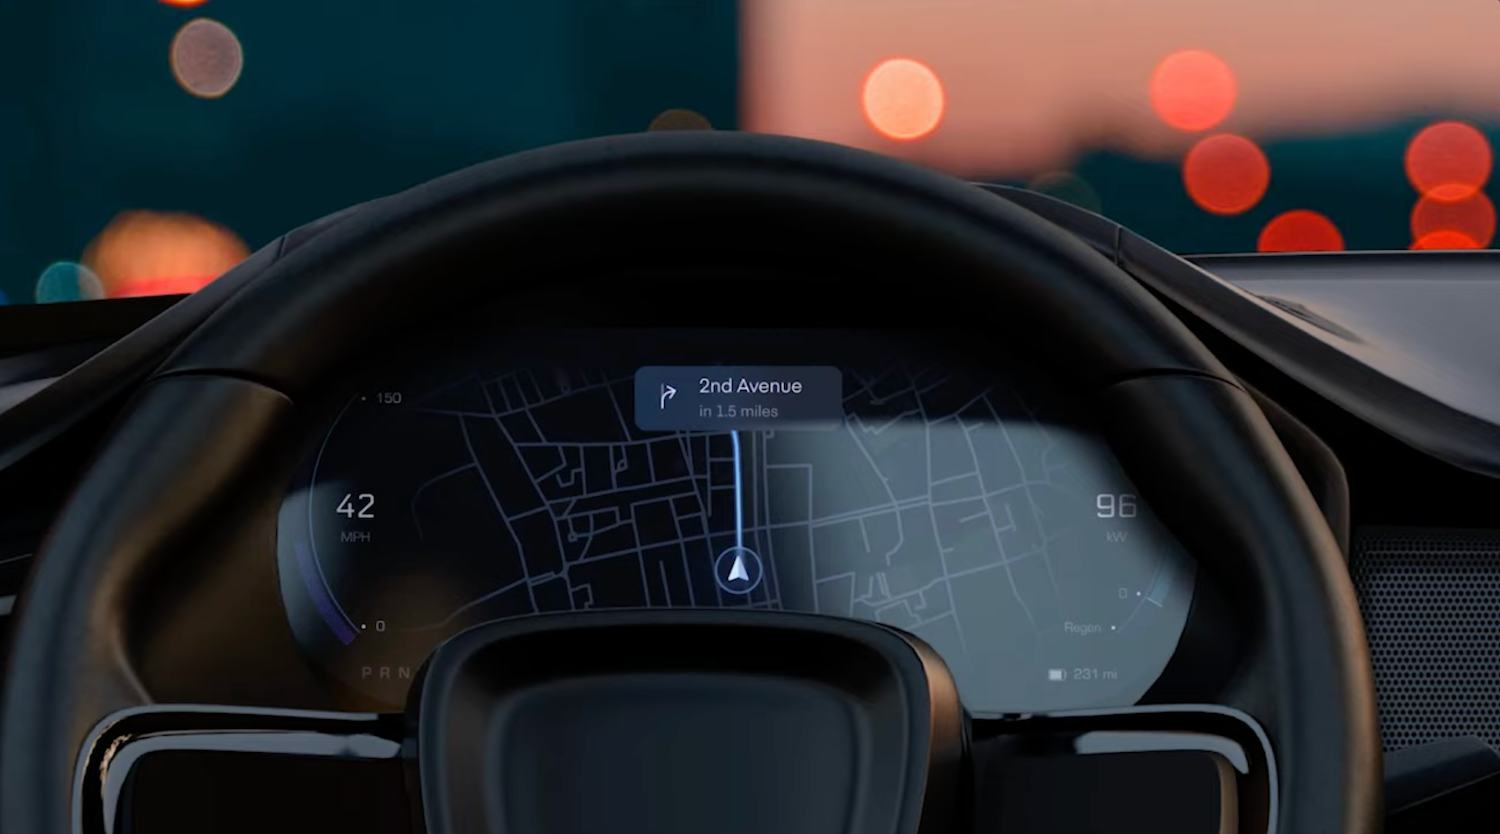 An image showing a navigation app running on instrument cluster of a car.